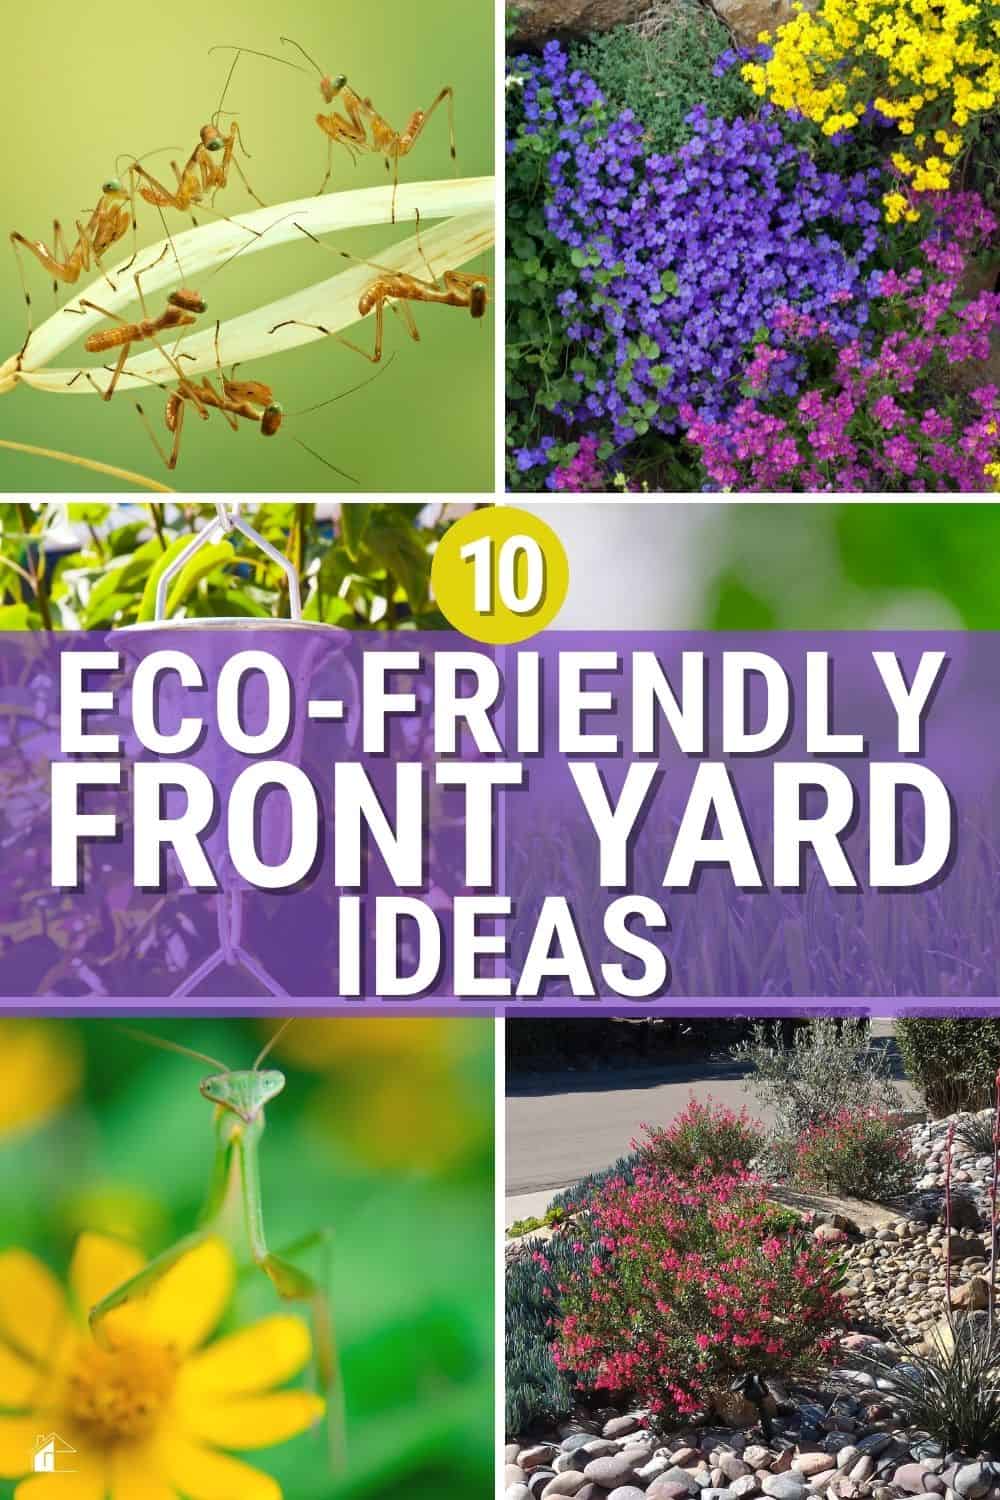 As a homeowner, you want your yard to look great, but you also want to make sure that you are environmentally responsible. So check out these eco-friendly front yard ideas to help you achieve both goals! via @mystayathome